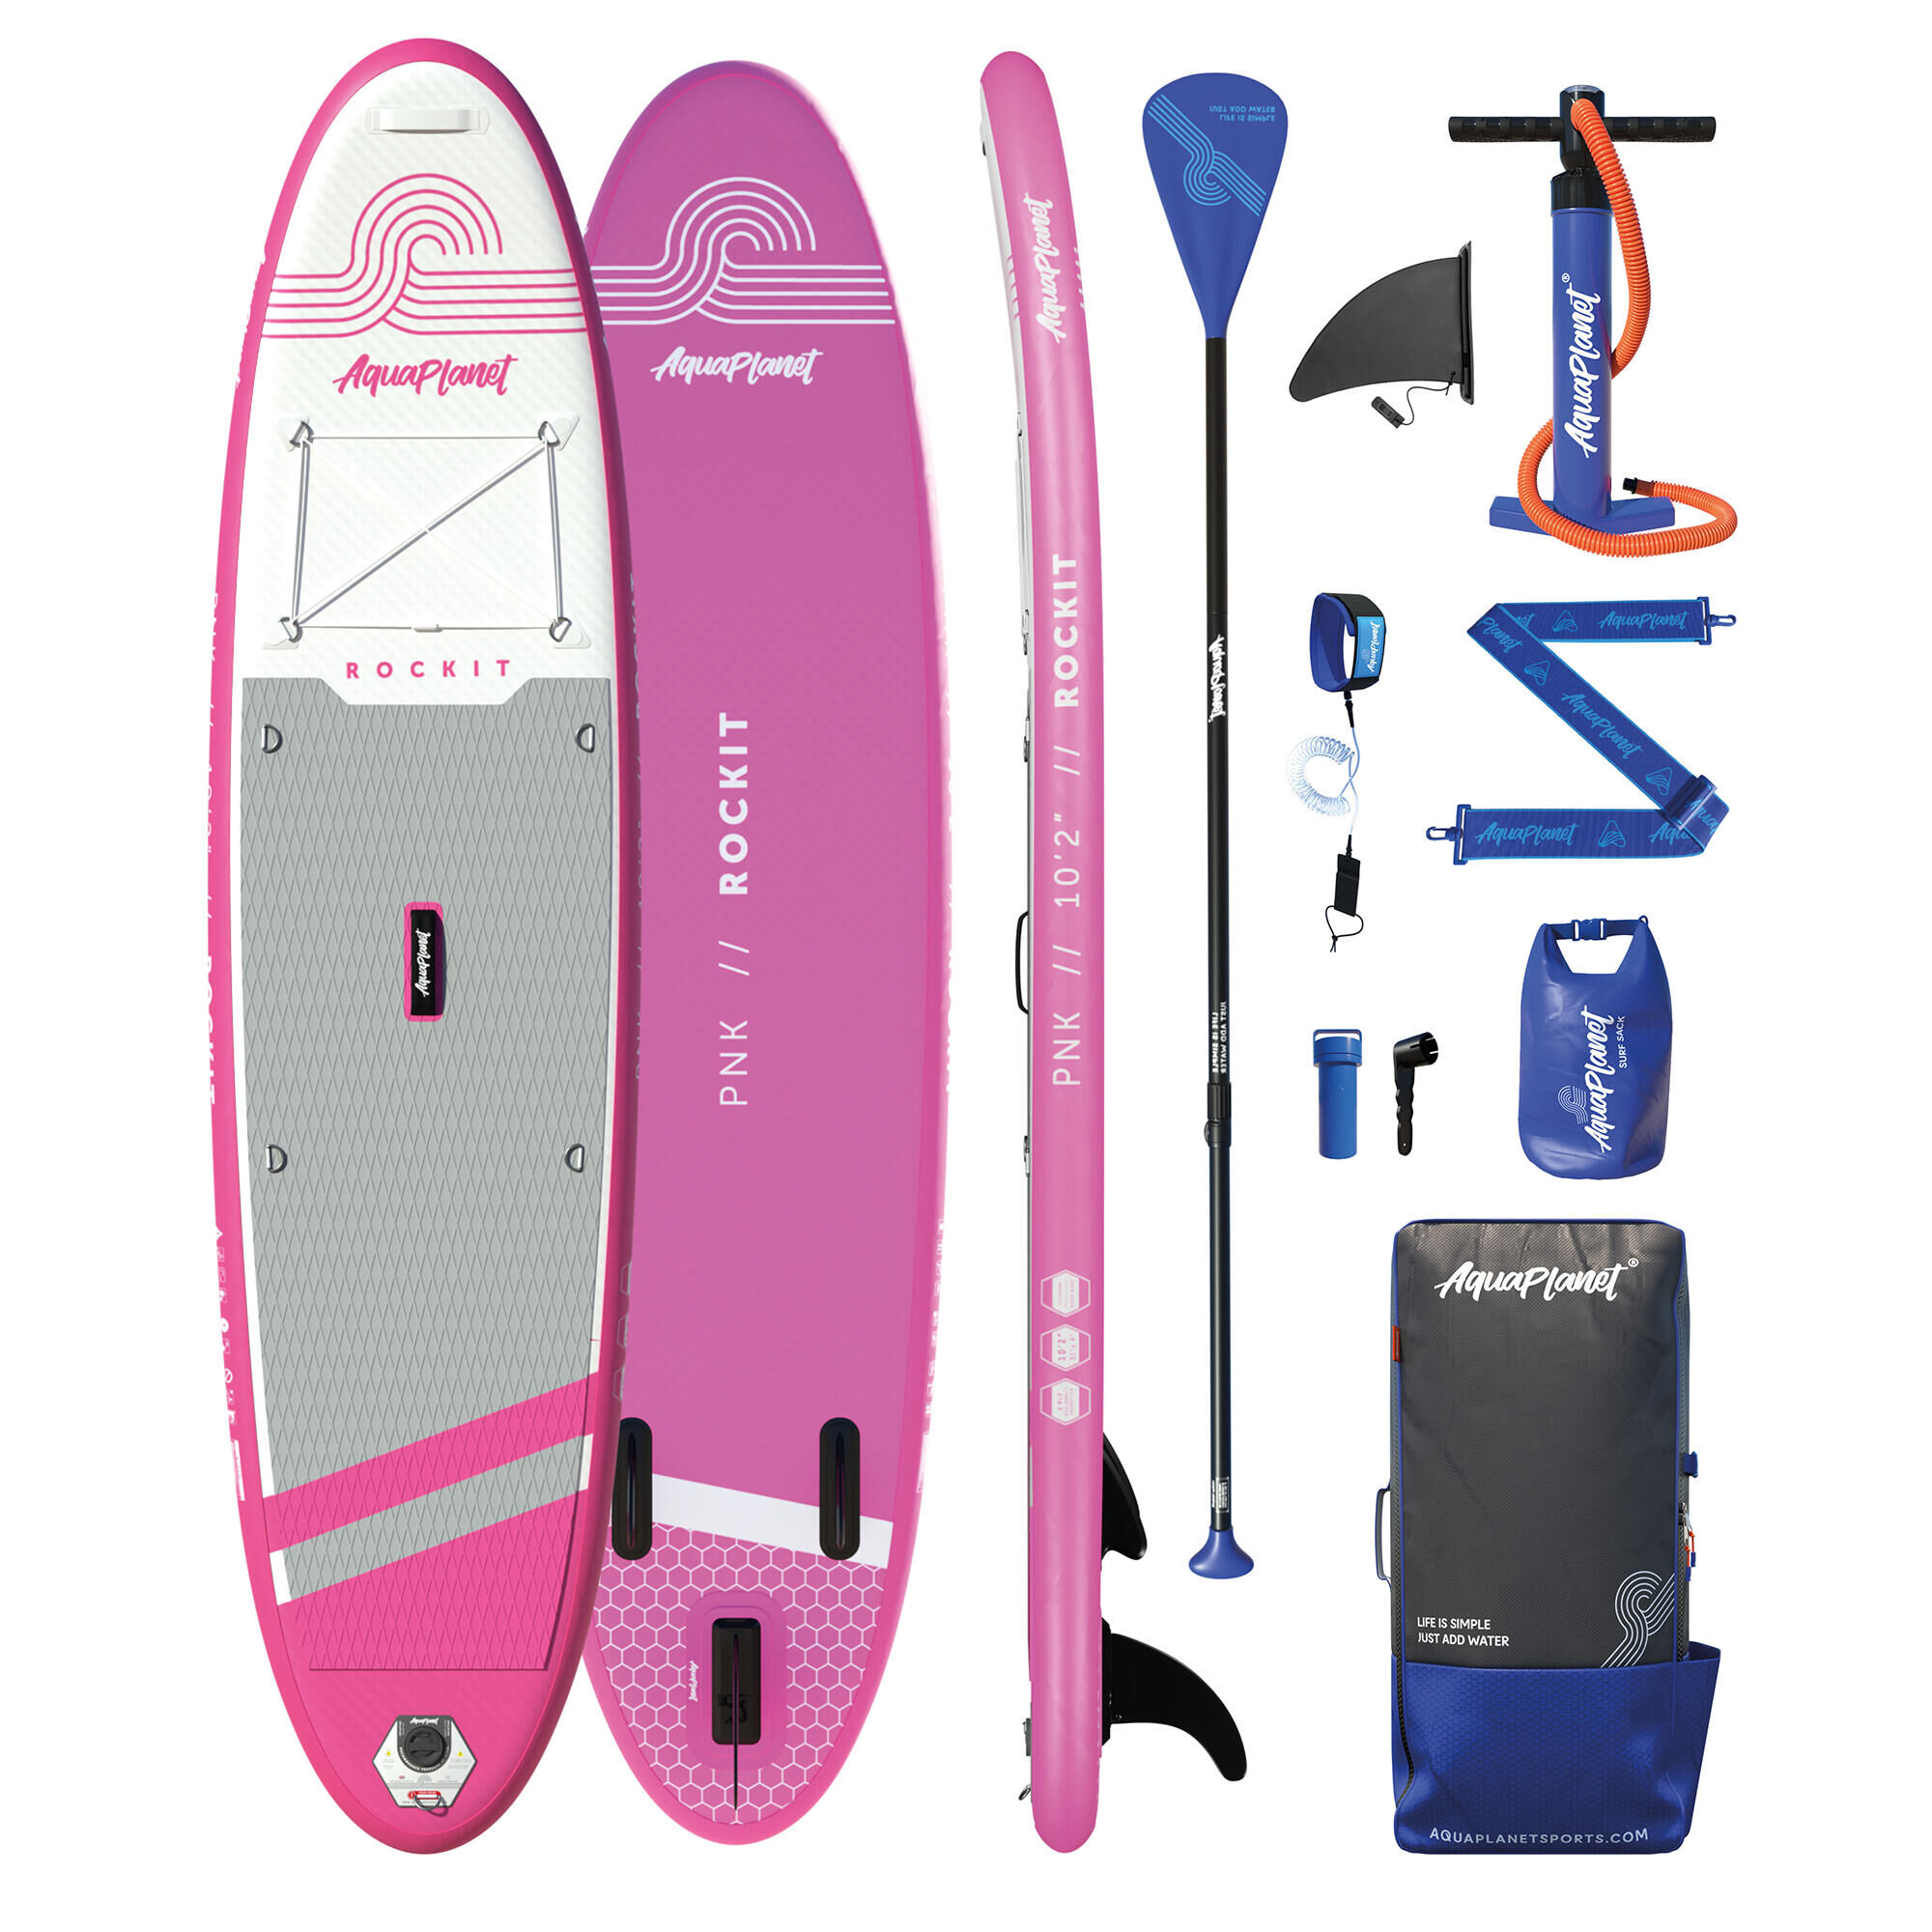 AQUAPLANET Aquaplanet ROCKIT 10'2 Inflatable Paddle Board Package - Pink